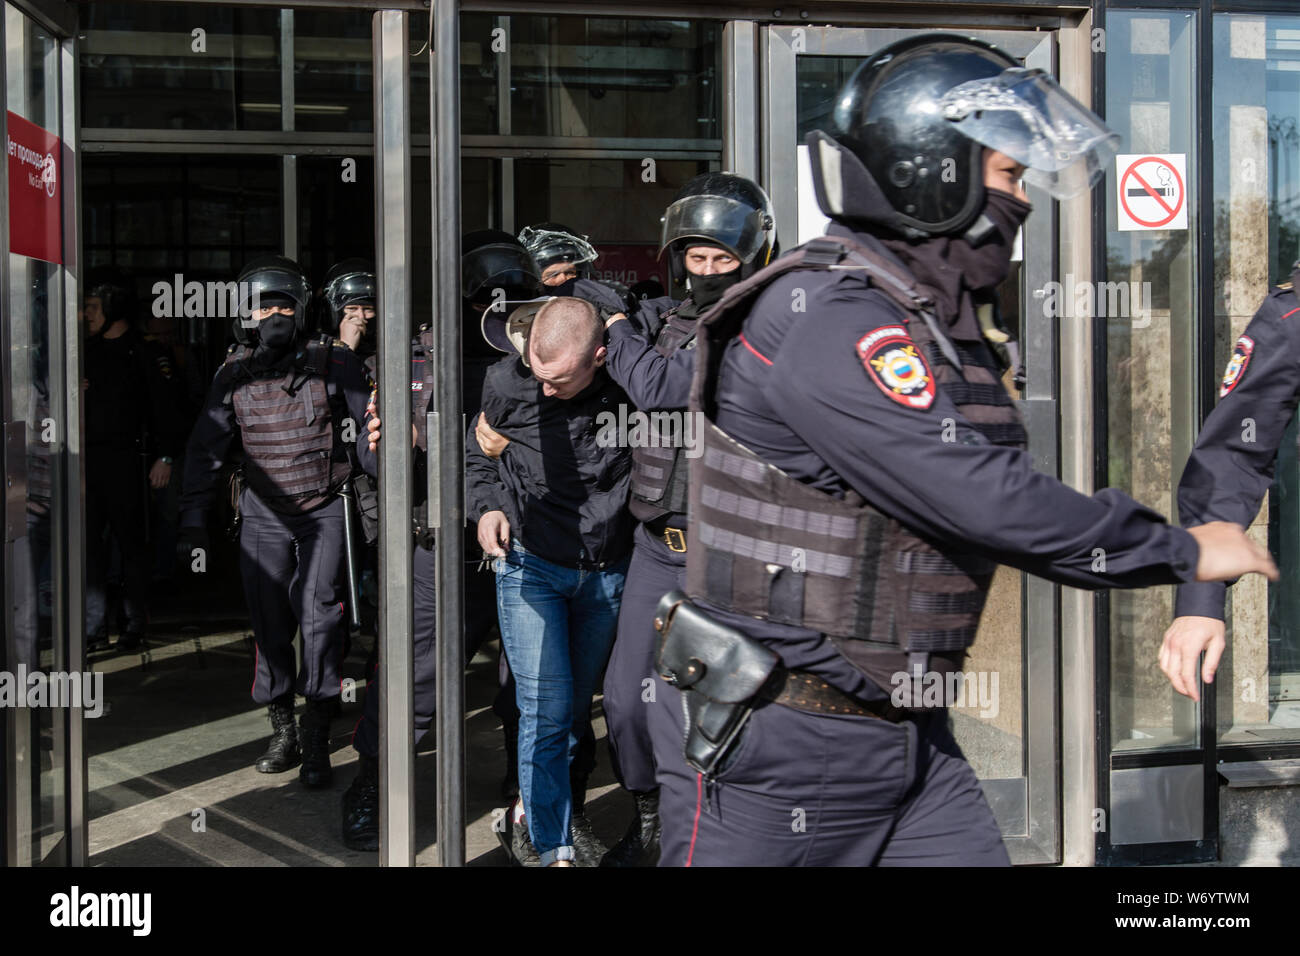 Police officers detain a man during an unsanctioned rally in the centre of Moscow, Russia.Moscow police detained more than 300 people who were protesting against the exclusion of some independent and opposition candidates from the city council ballot, a monitoring group said. Stock Photo